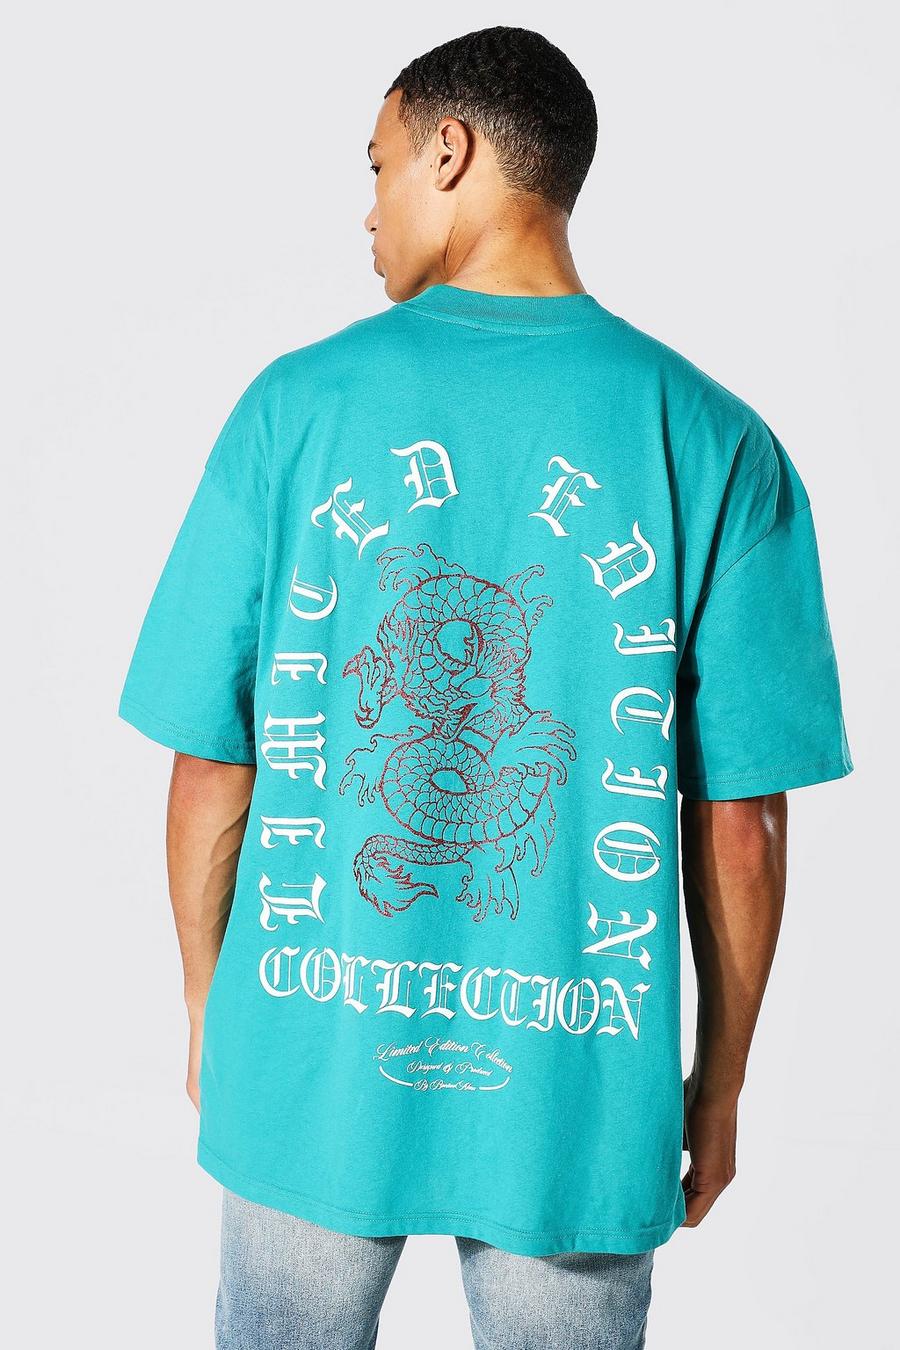 T-shirt Tall con stampa Limited sul retro, Teal verde